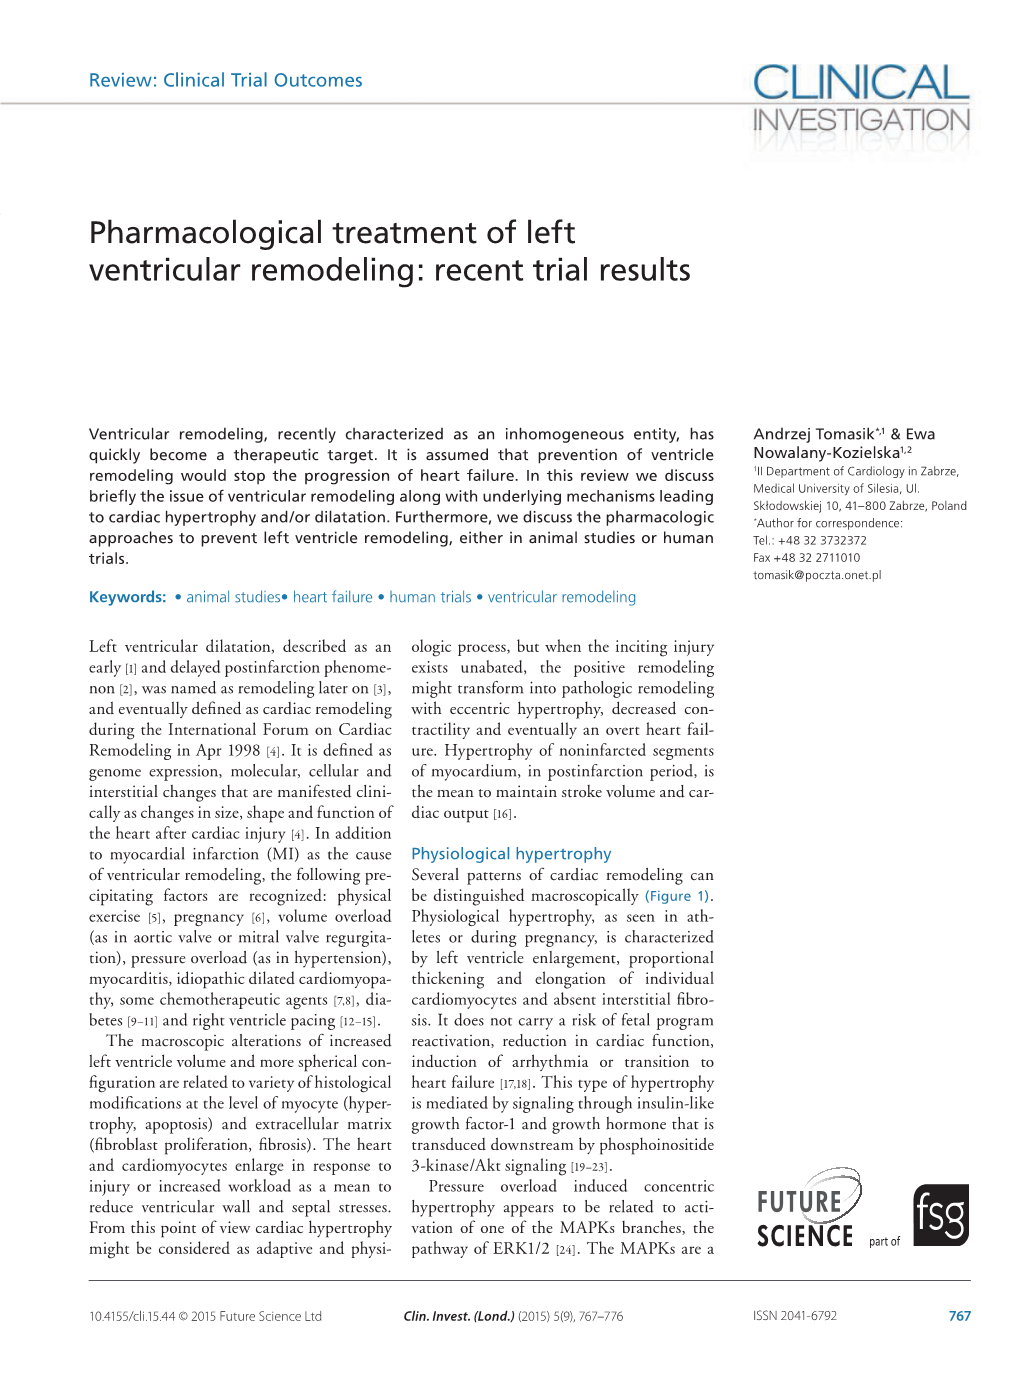 Pharmacological Treatment of Left Ventricular Remodeling: Recent Trial Results